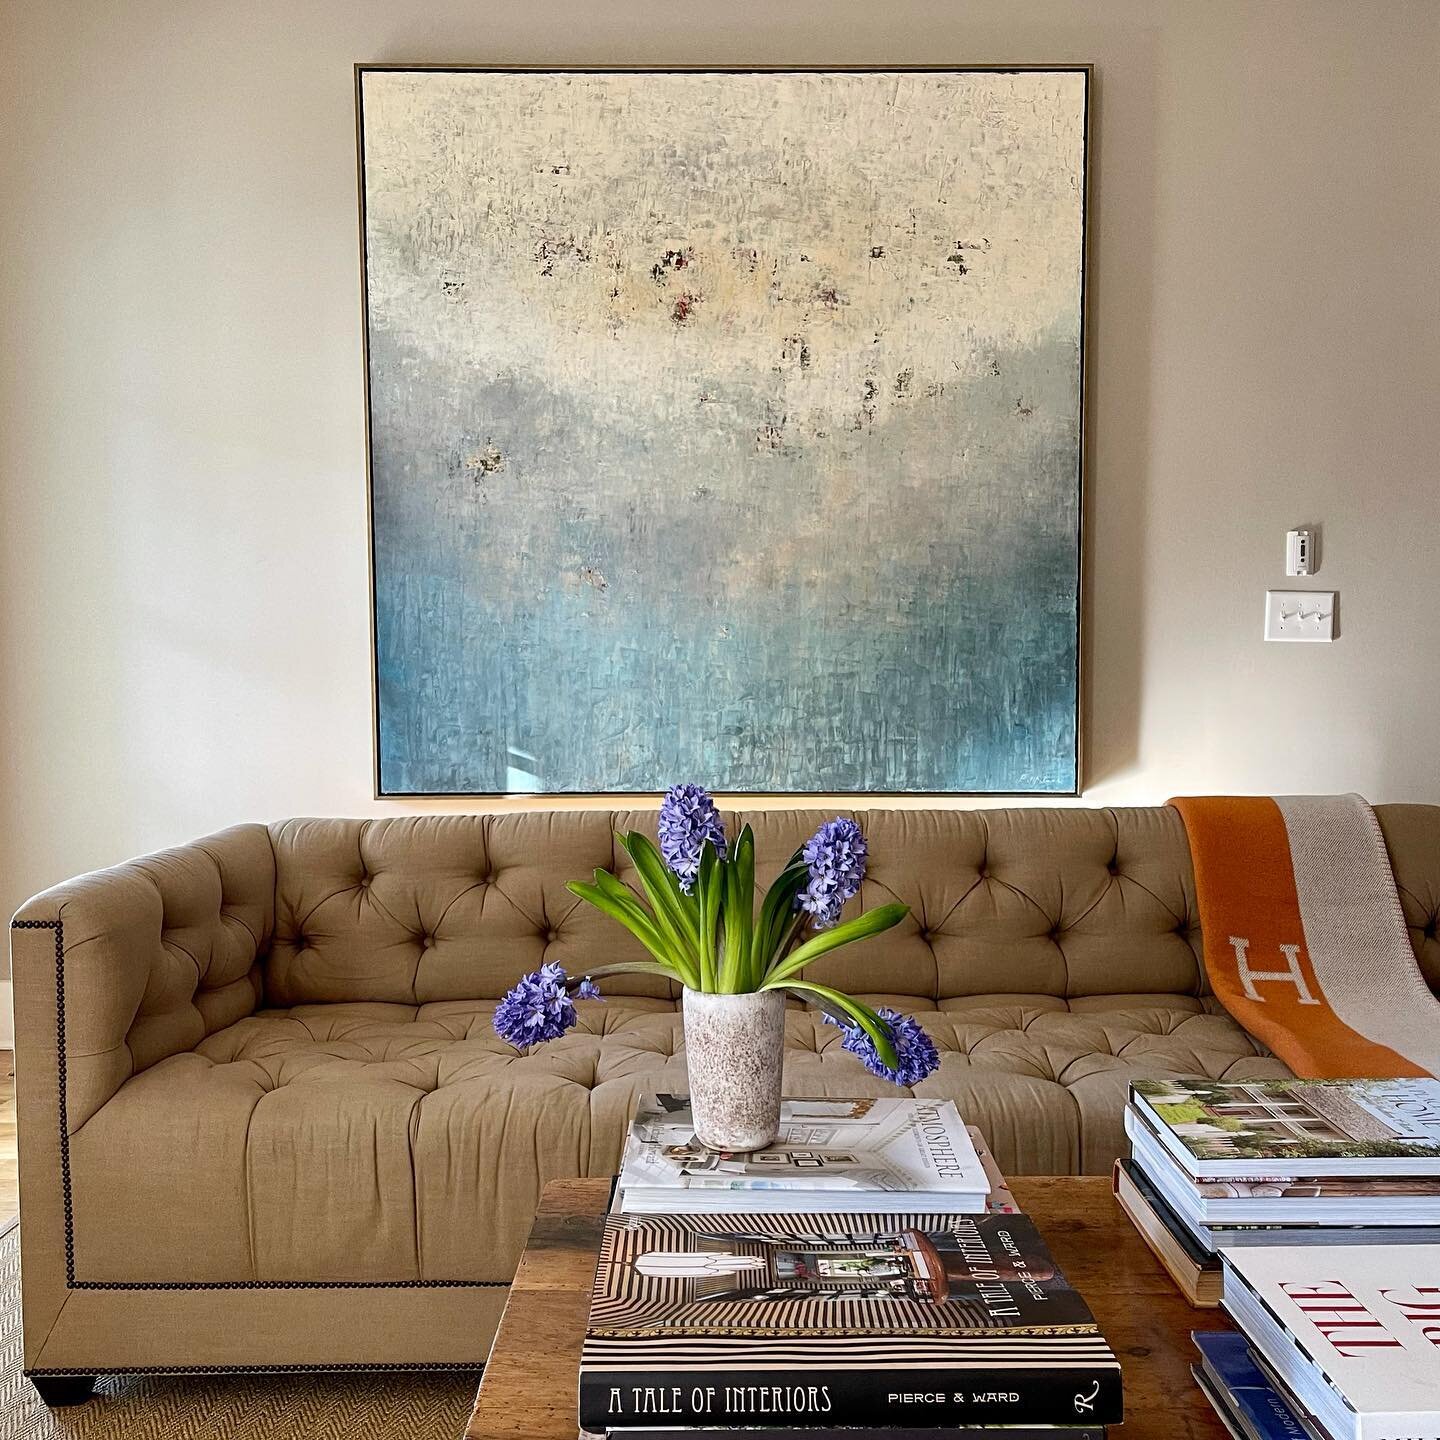 Beautiful light this morning!
If you are new to Nashville, be sure to check out one of our favorite local artists, @ed.nash.fine.art 

#nashvilletn #nashvillerealestate #ednash #nashvilleinteriors #buynashville #sellnashville #stewartwhiterealestate